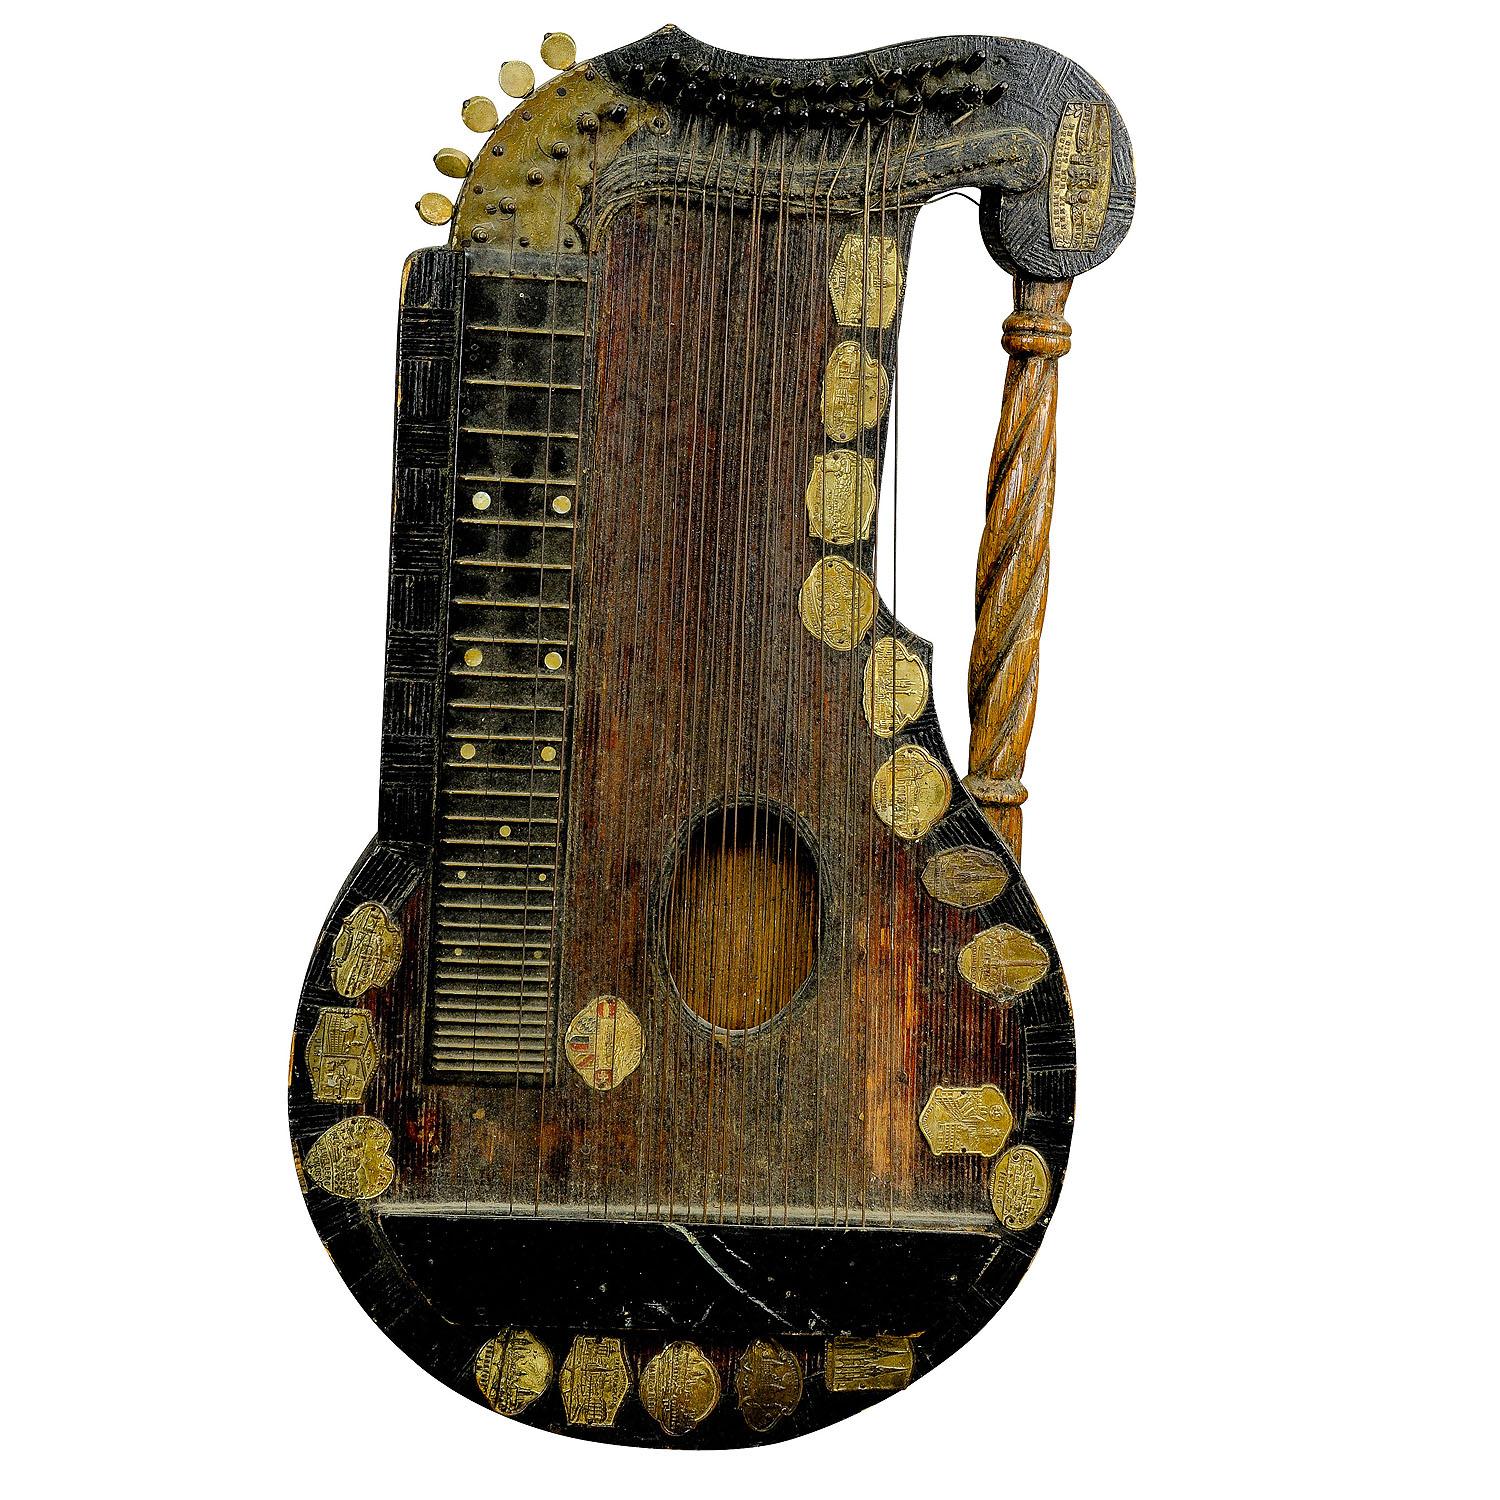 Decorative Folk Art Zither made of Matchsticks by a Wayfarer

An unusual zither model completely made of matchsticks which where glued together and carved afterwards. Handmade most probably by a wayfarer in the 1920s. The zither is decorated with